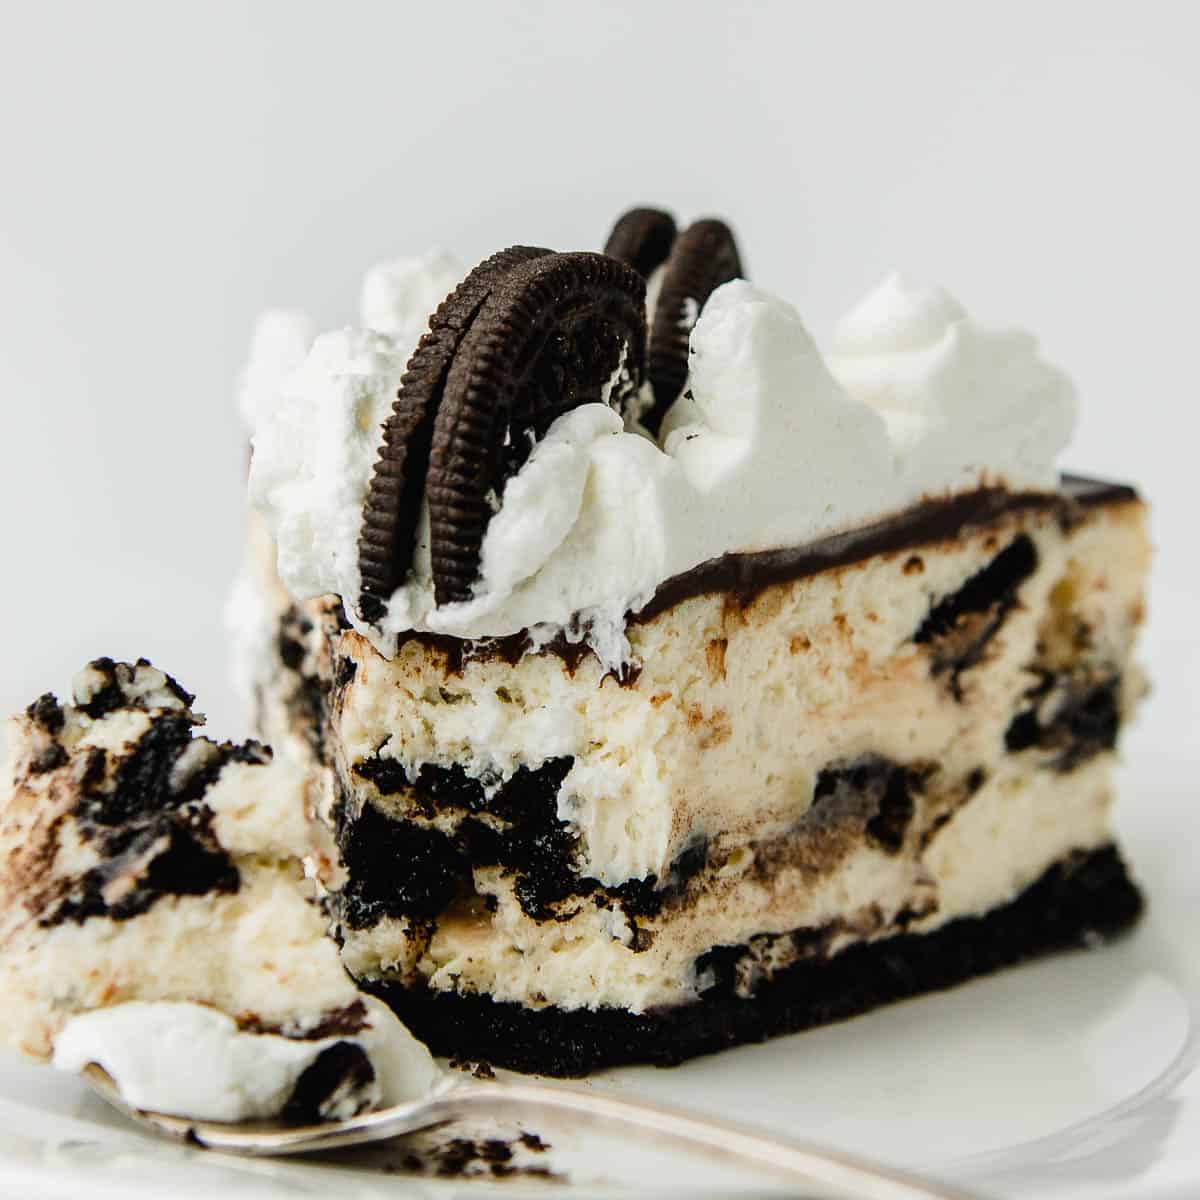 A slice of oreo cheesecake on a plate.